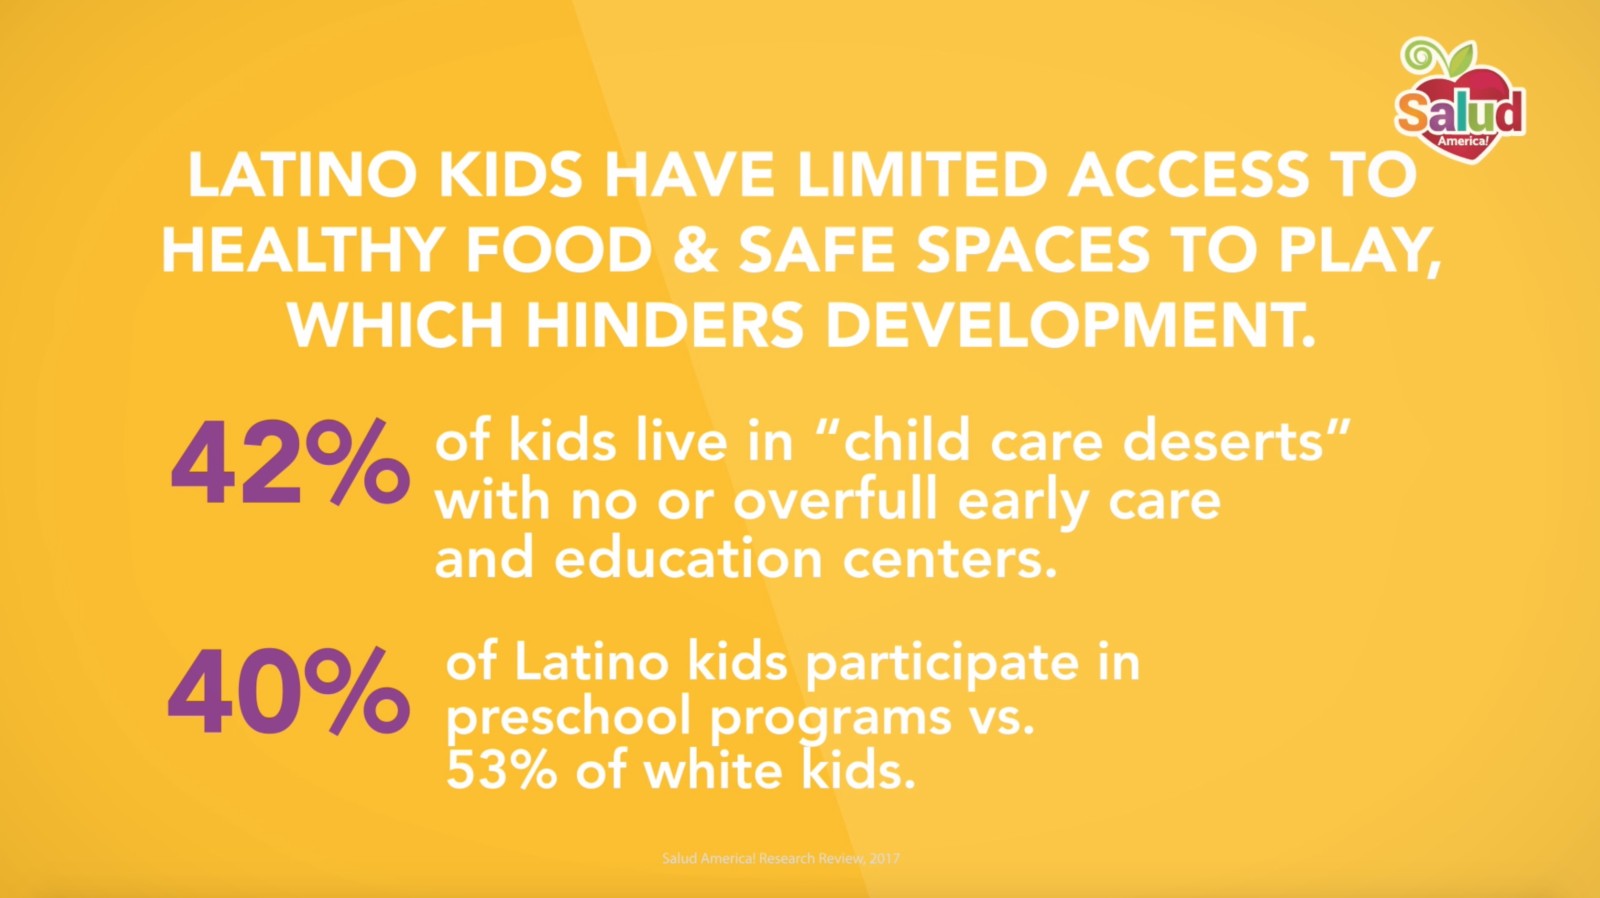 Latino early childhood development - problem - food, spaces, child care, preschool